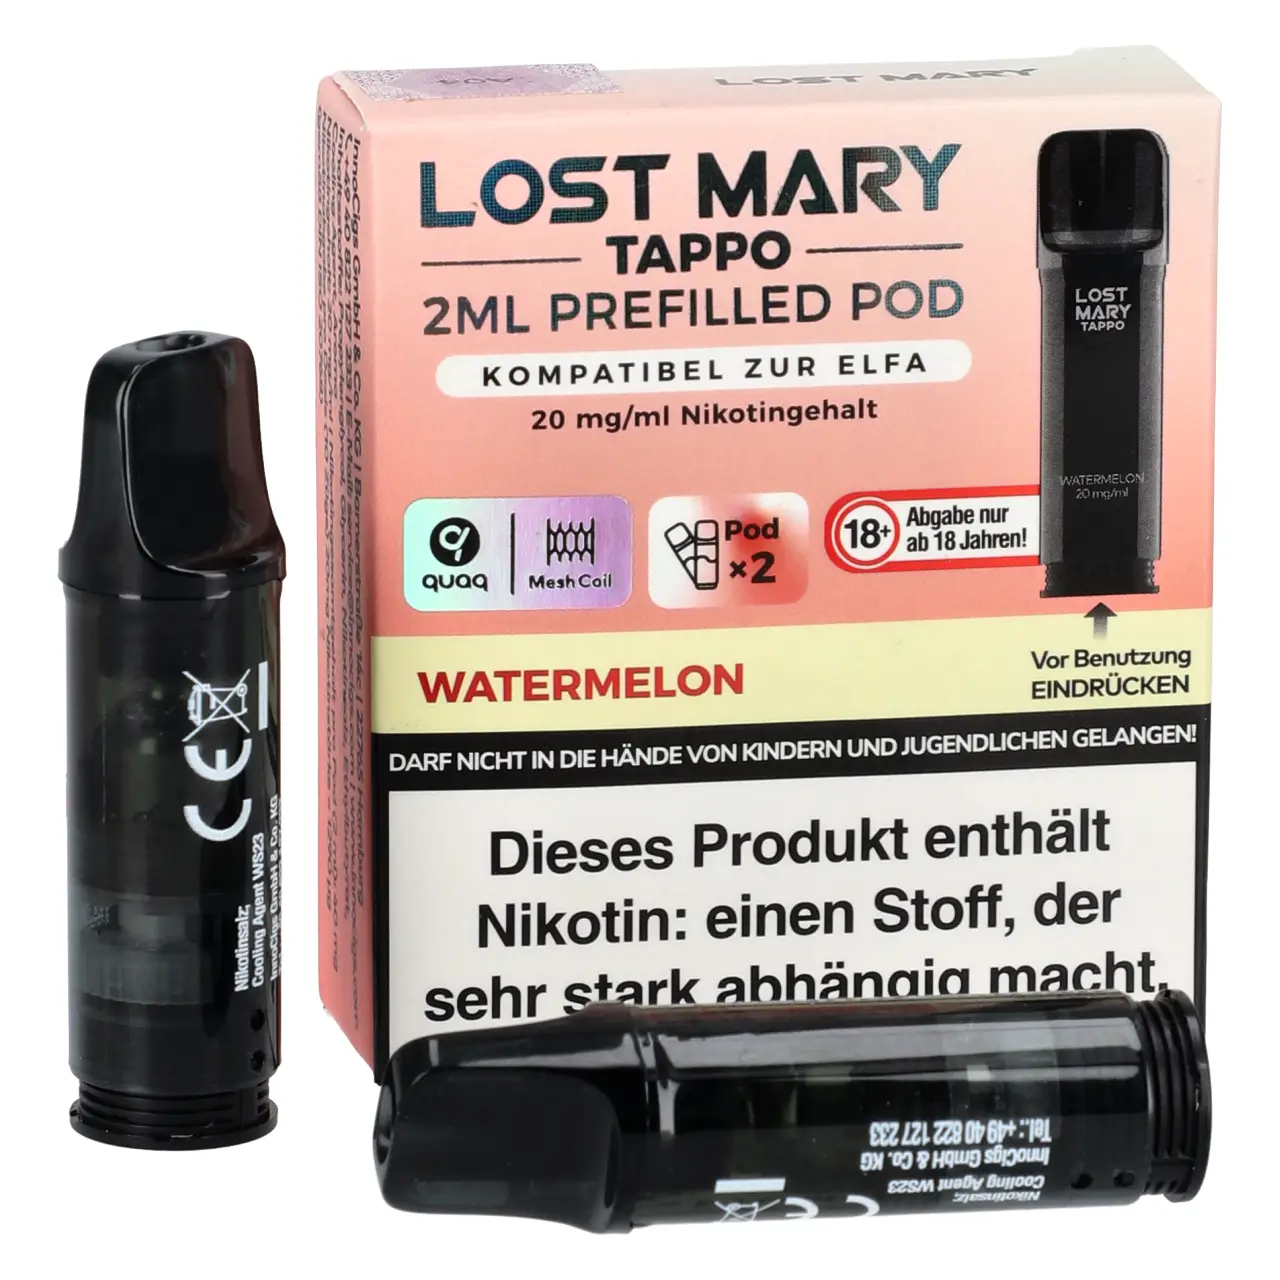 Lost Mary Tappo Prefilled Pod - Watermelon - 2er Packung